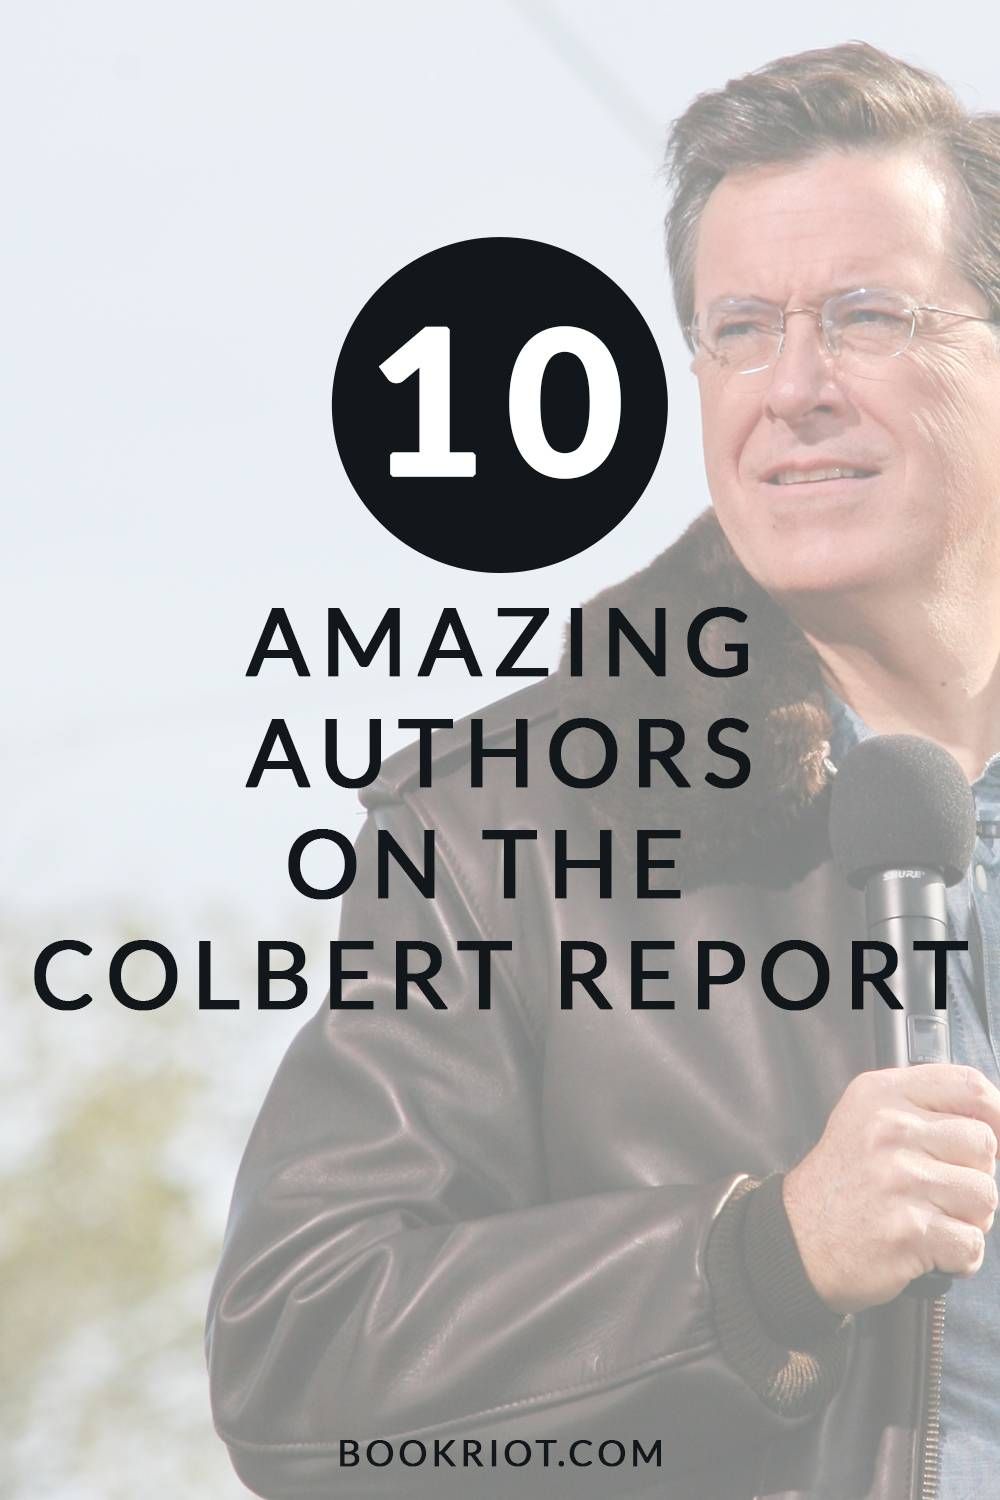 Toni Morrison, Malcolm Gladwell, Ann Patchett, + 7 more amazing author appearances on The Colbert Report!